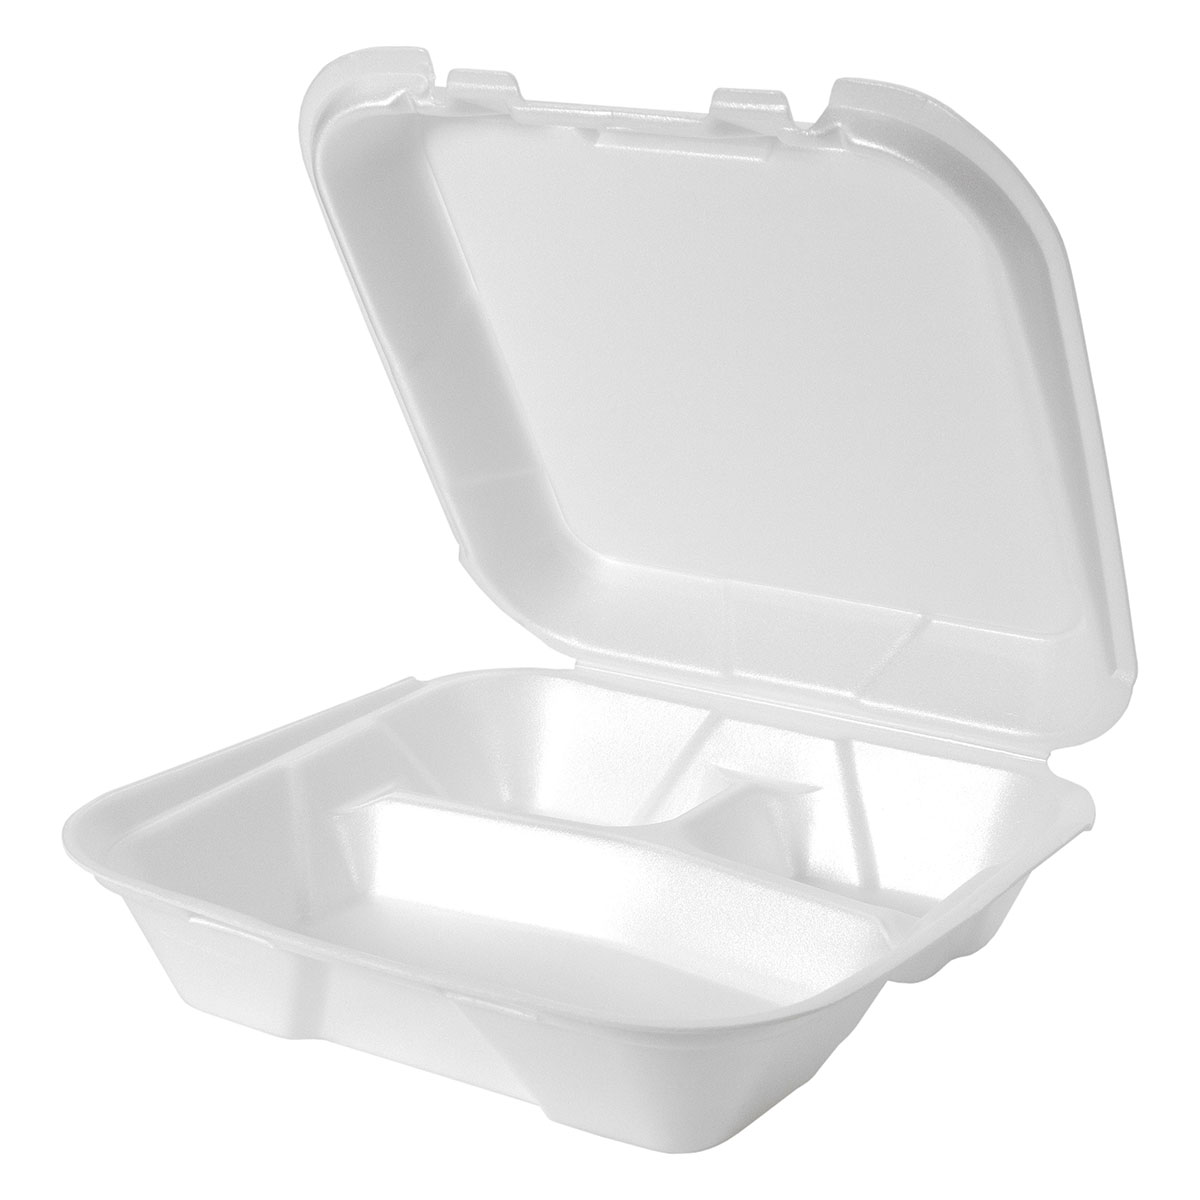 White 9" x 9" Three-Compartment Snap It Lock  Hinged Square Container